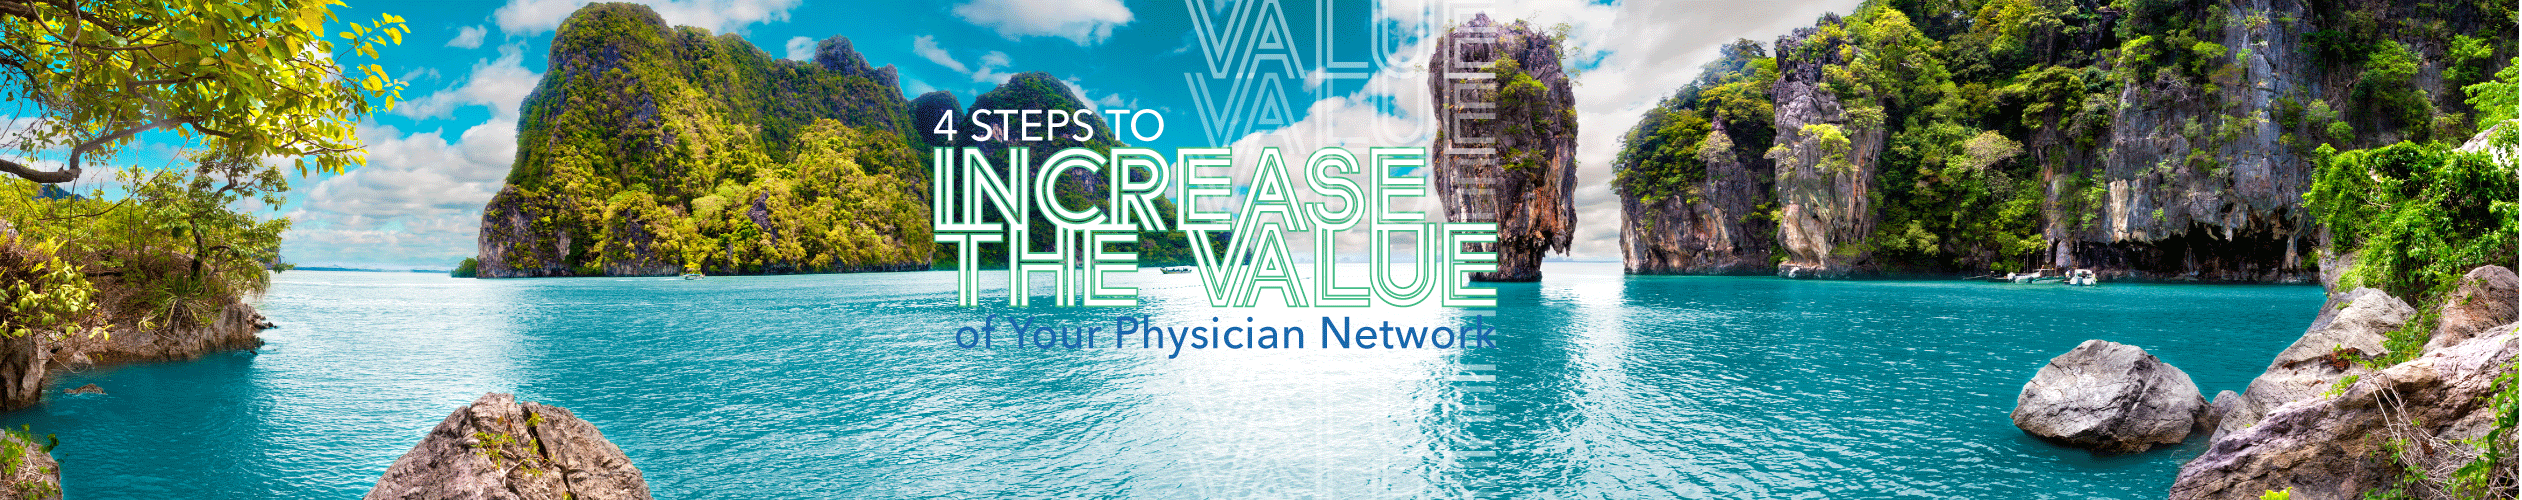 4 Steps to Increase the Value of Your Physician Network